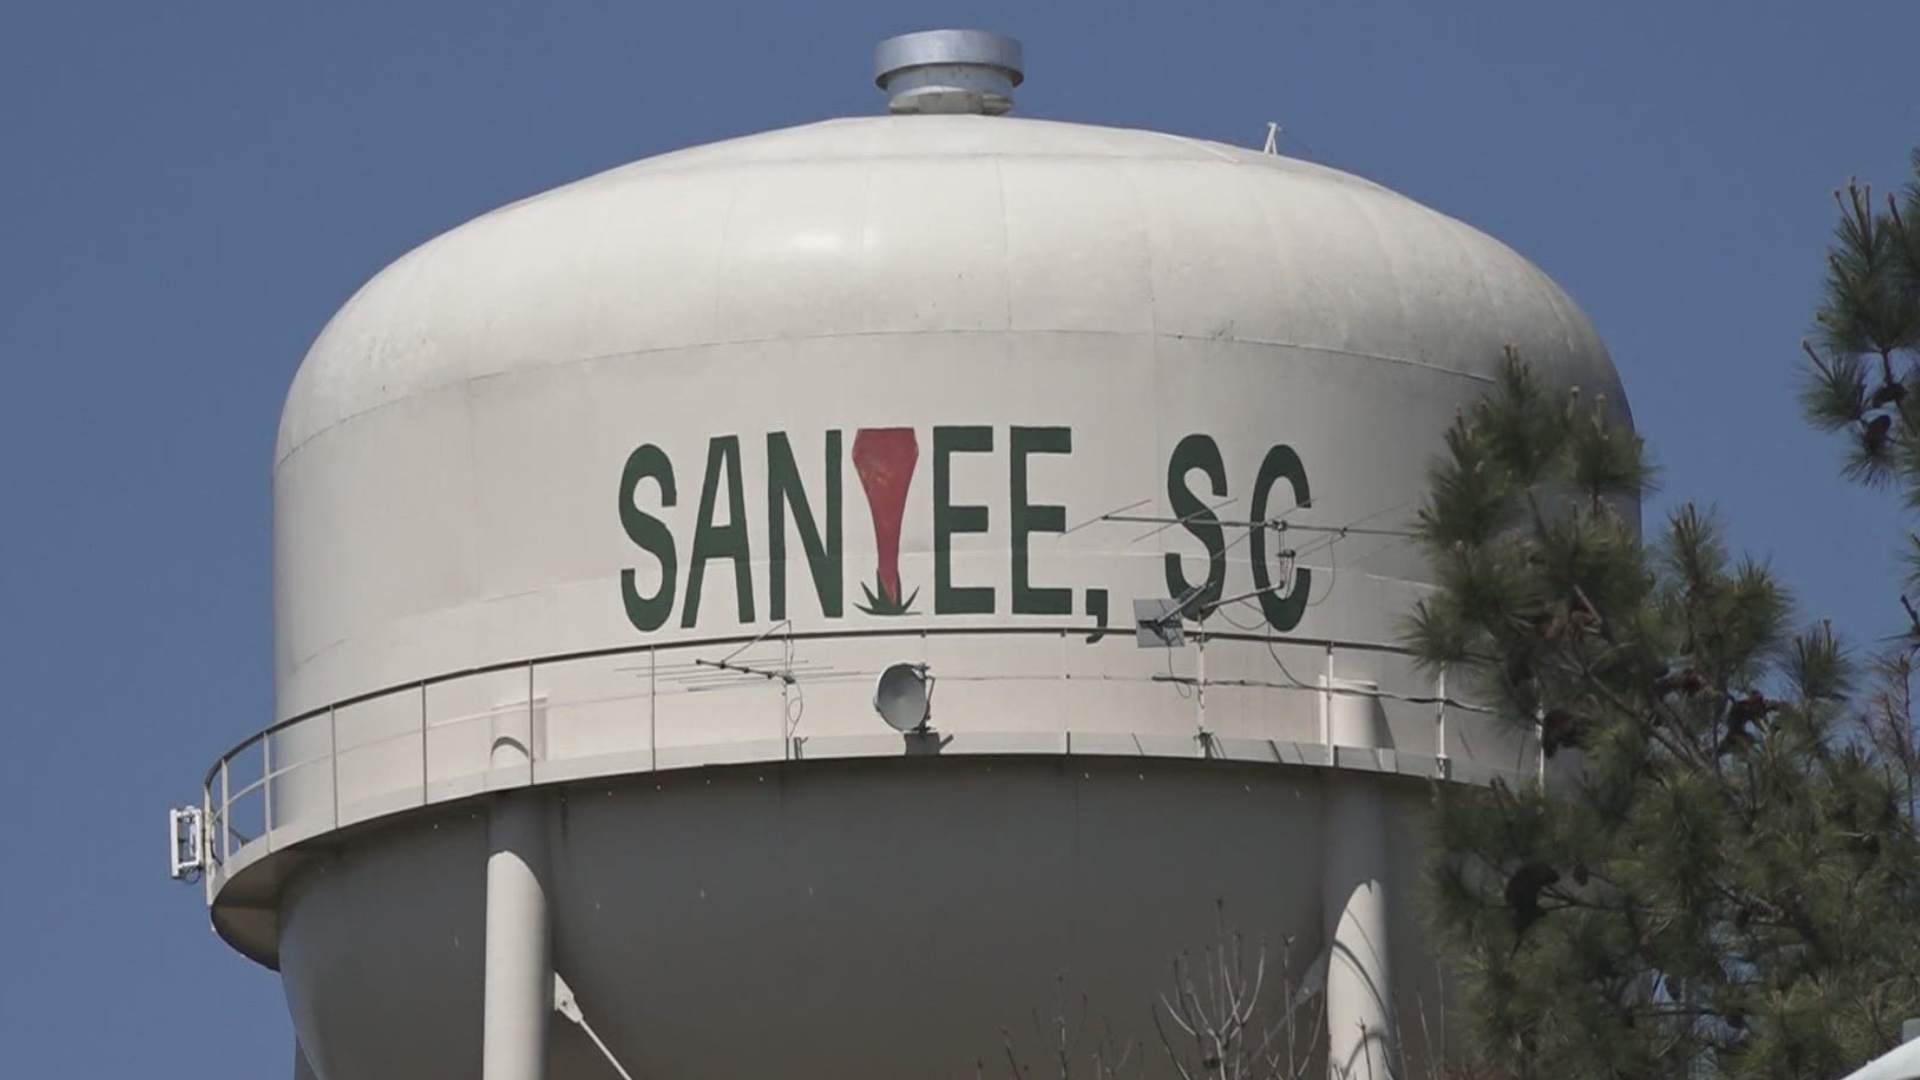 During the month of April, Santee Council members are asking residents for suggestions about keeping the town clean.